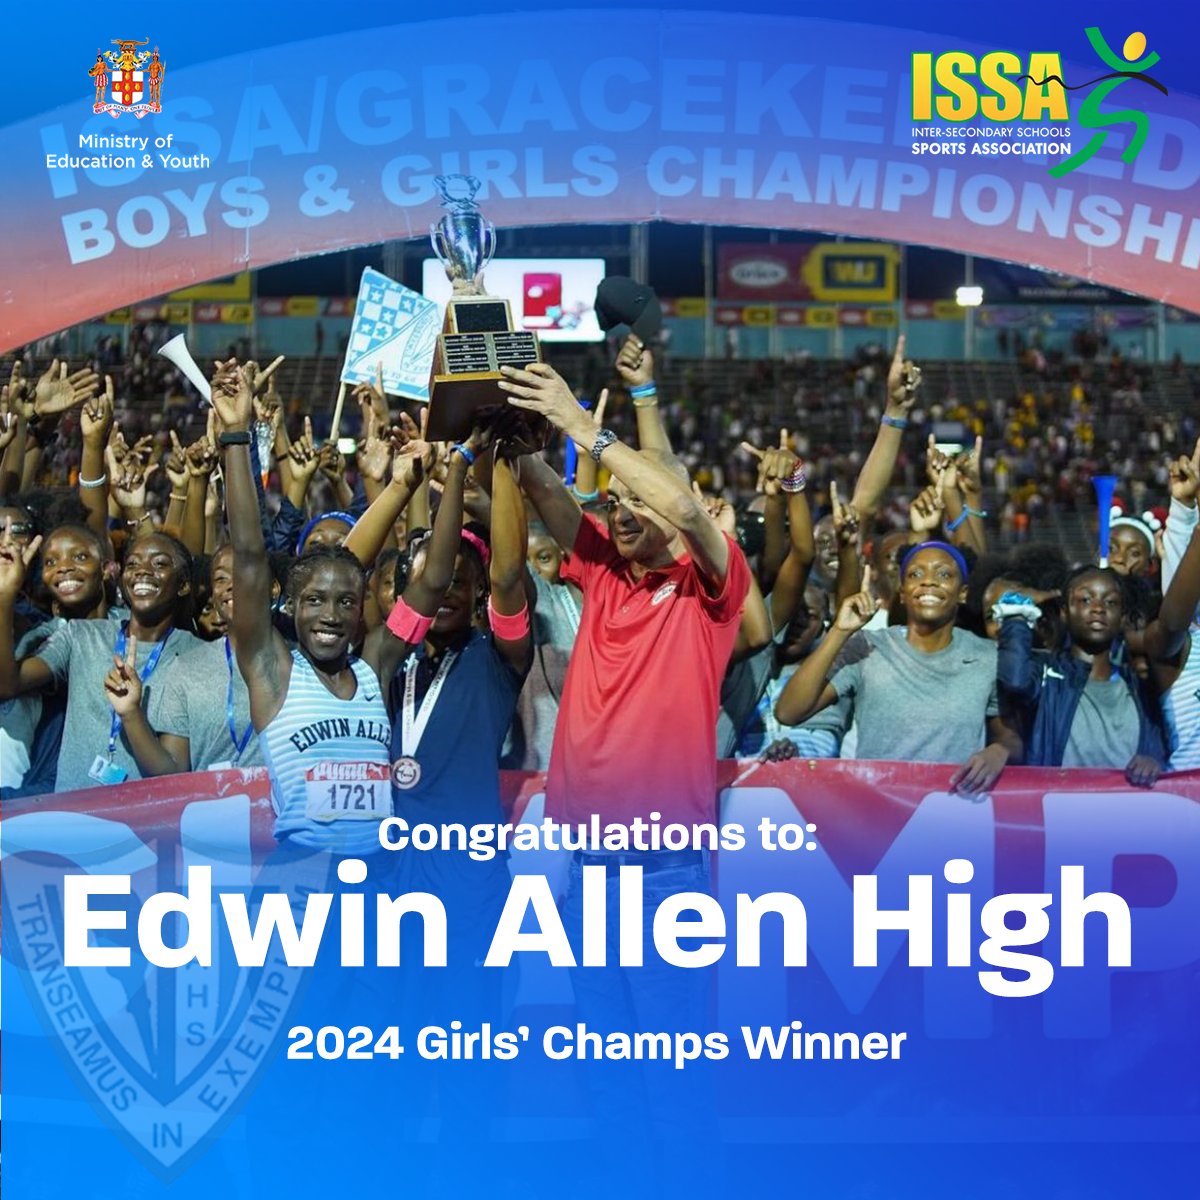 Congratulations to Edwin Allen High School on their win at the 2024 ISSA/Grace Kennedy Girl's Championship